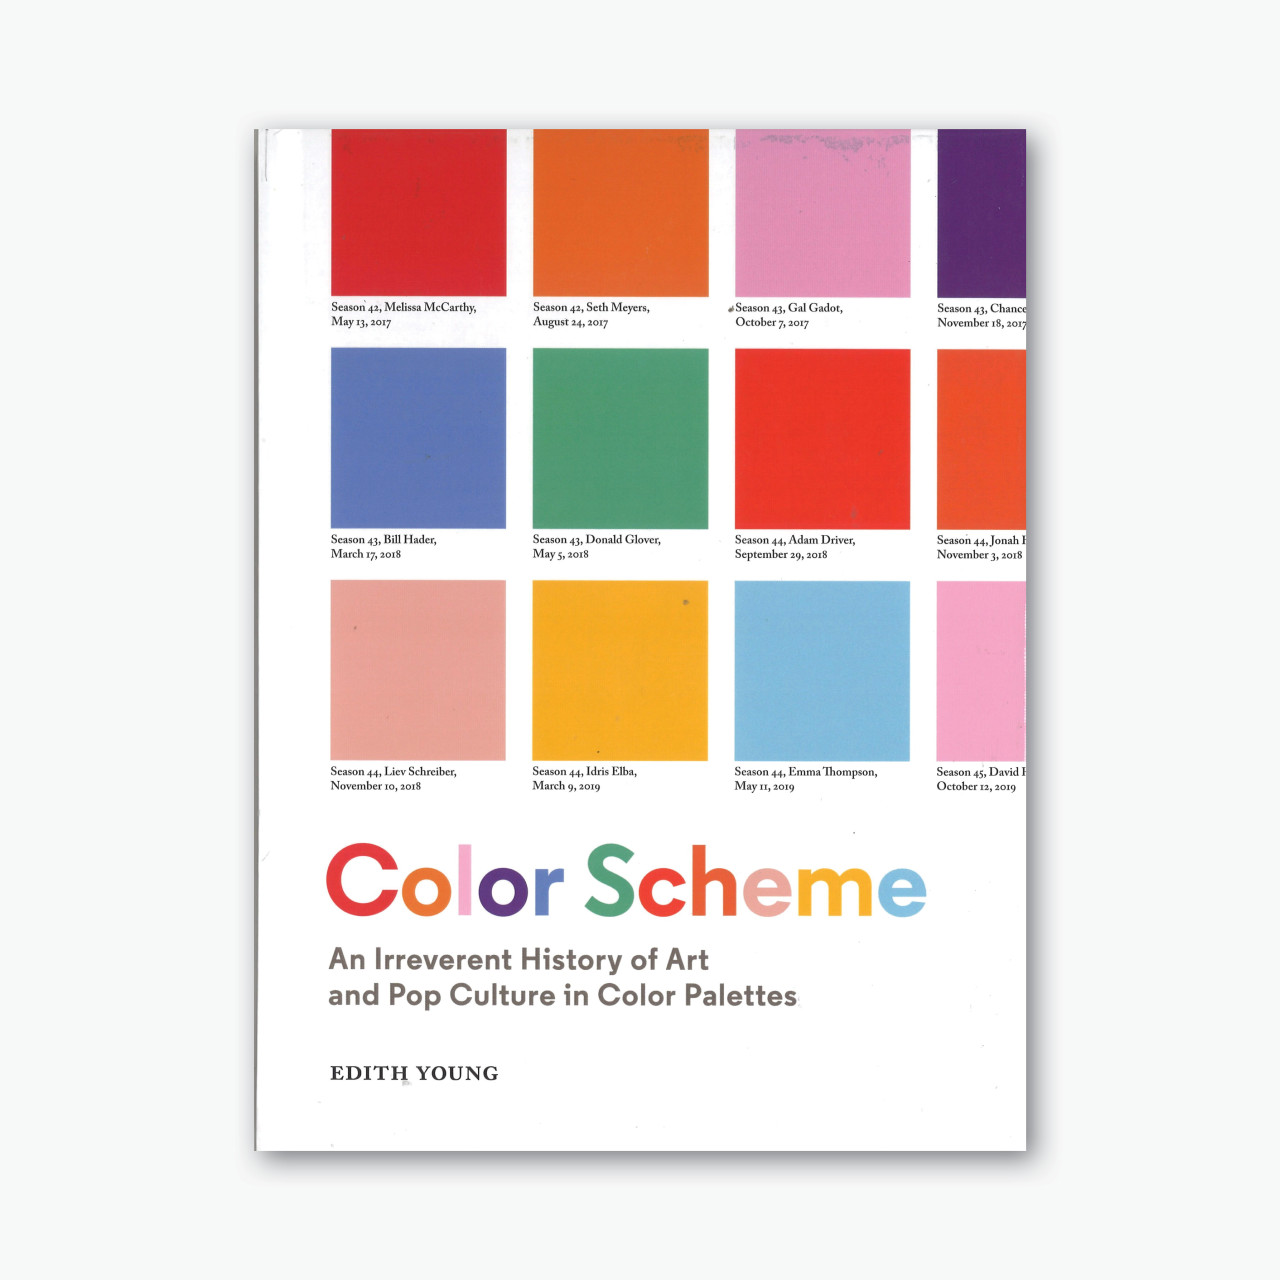 Princeton Architectural Press - PRE-ORDER SWEEPSTAKES! Enter for a chance  to win a custom personalized color palette designed by Edith Young to  celebrate her forthcoming book Color Scheme: An Irreverent History of